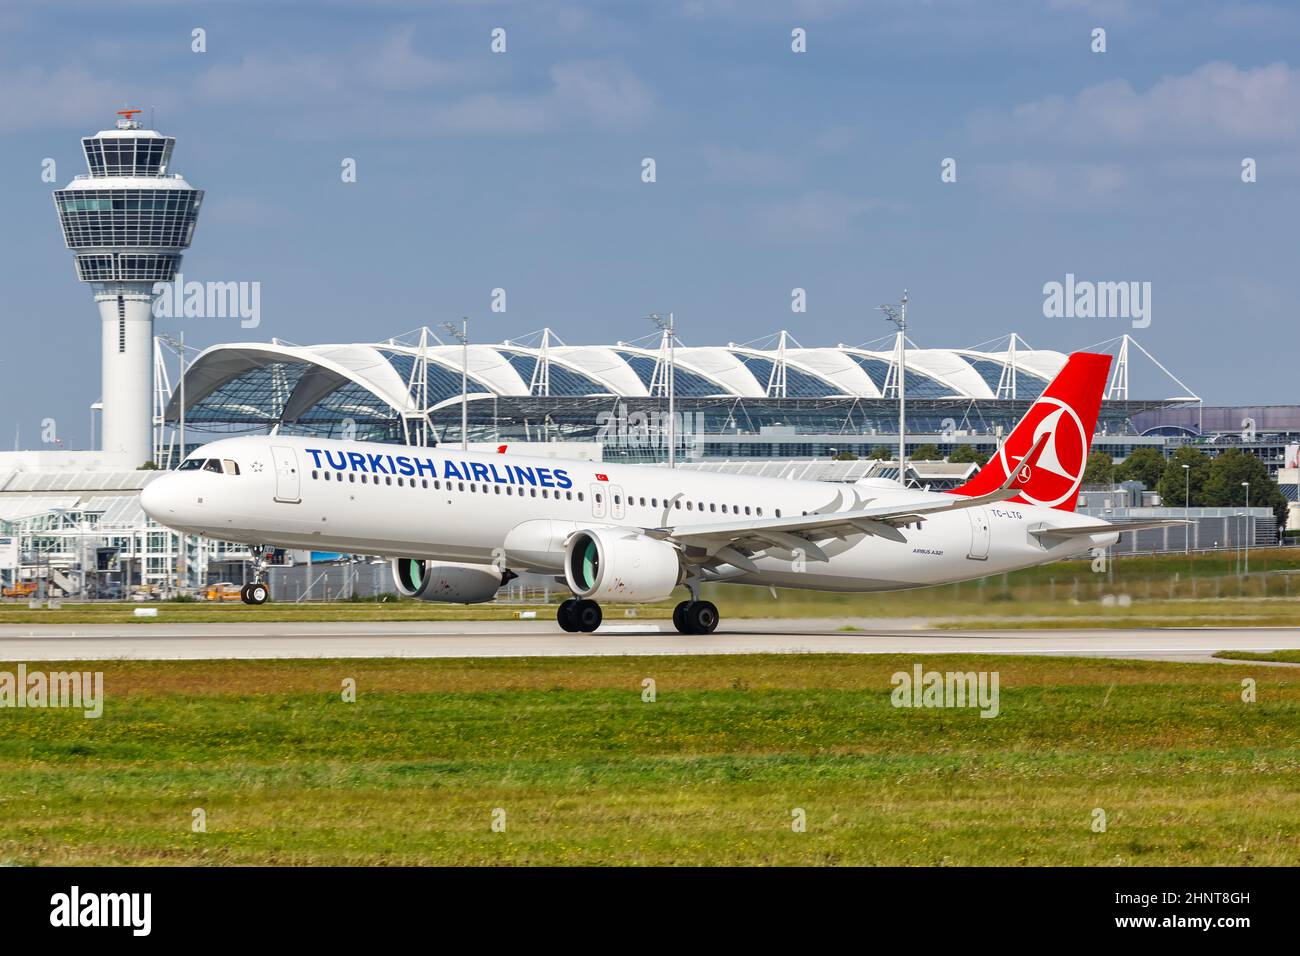 Turkish Airlines Airbus A321neo airplane Munich airport in Germany Stock Photo